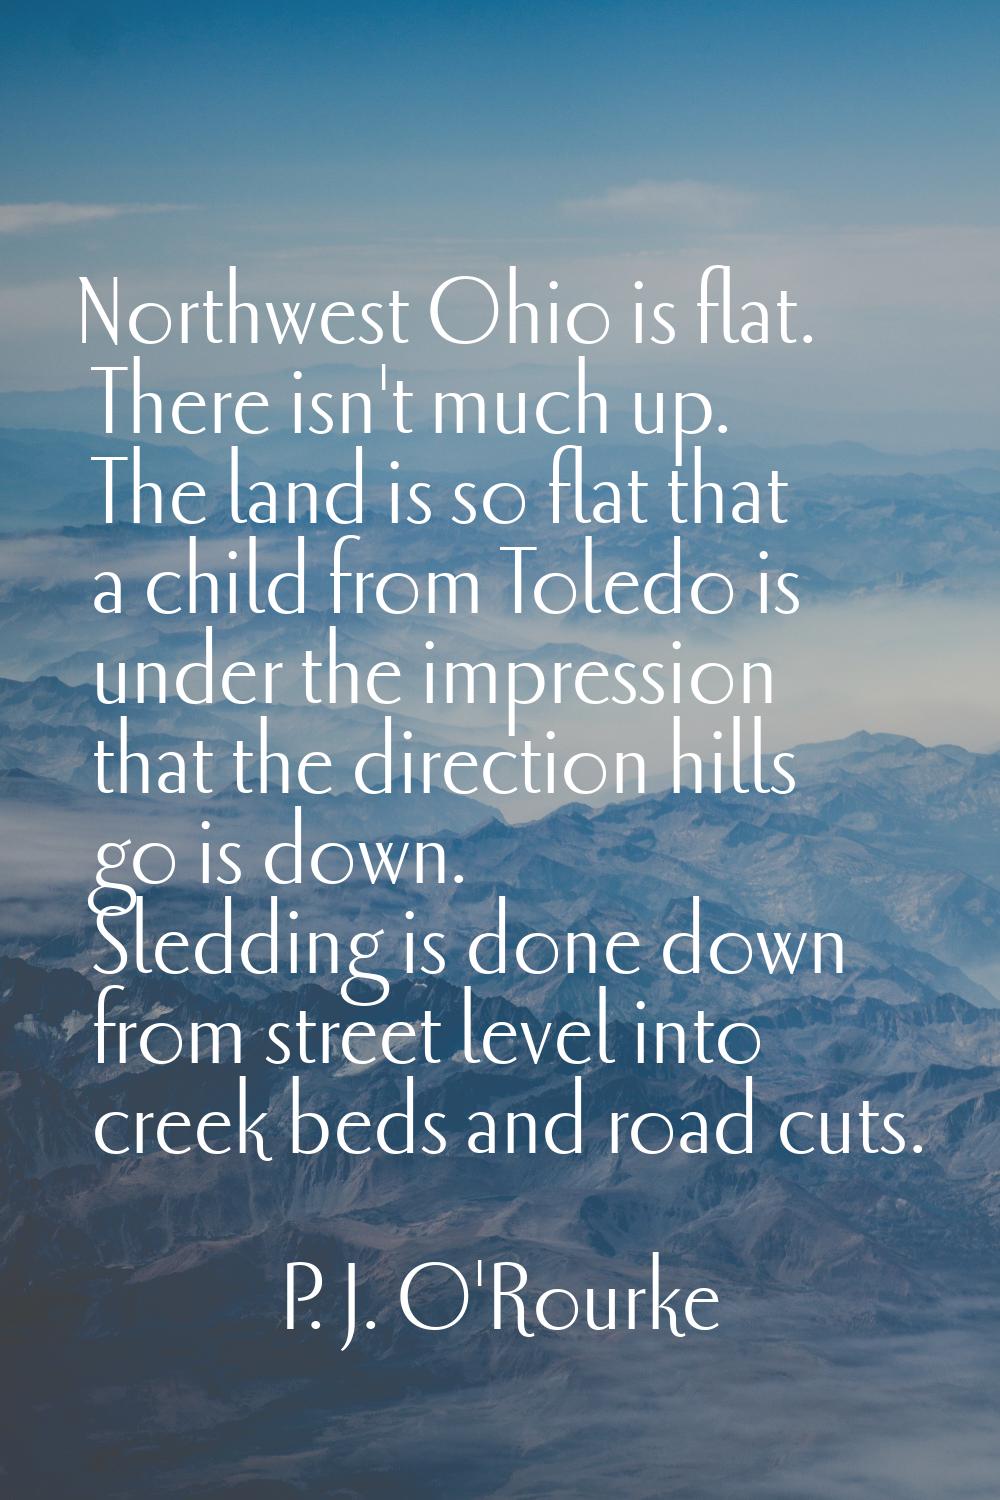 Northwest Ohio is flat. There isn't much up. The land is so flat that a child from Toledo is under 